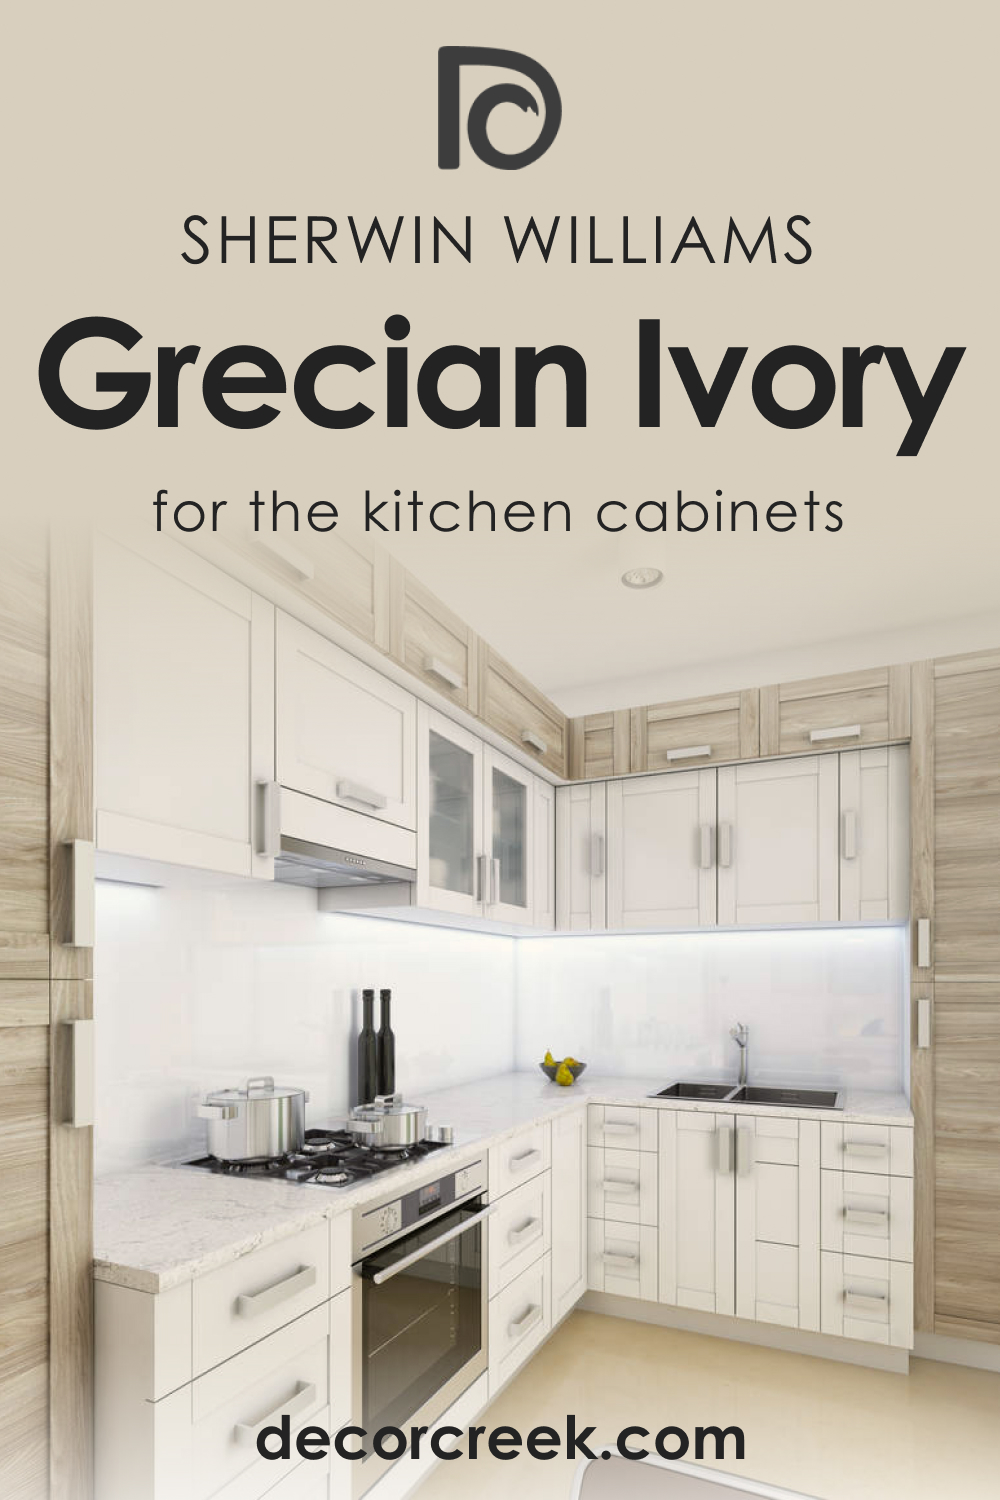 How to Use SW 7541 Grecian Ivory for the Kitchen Cabinets?